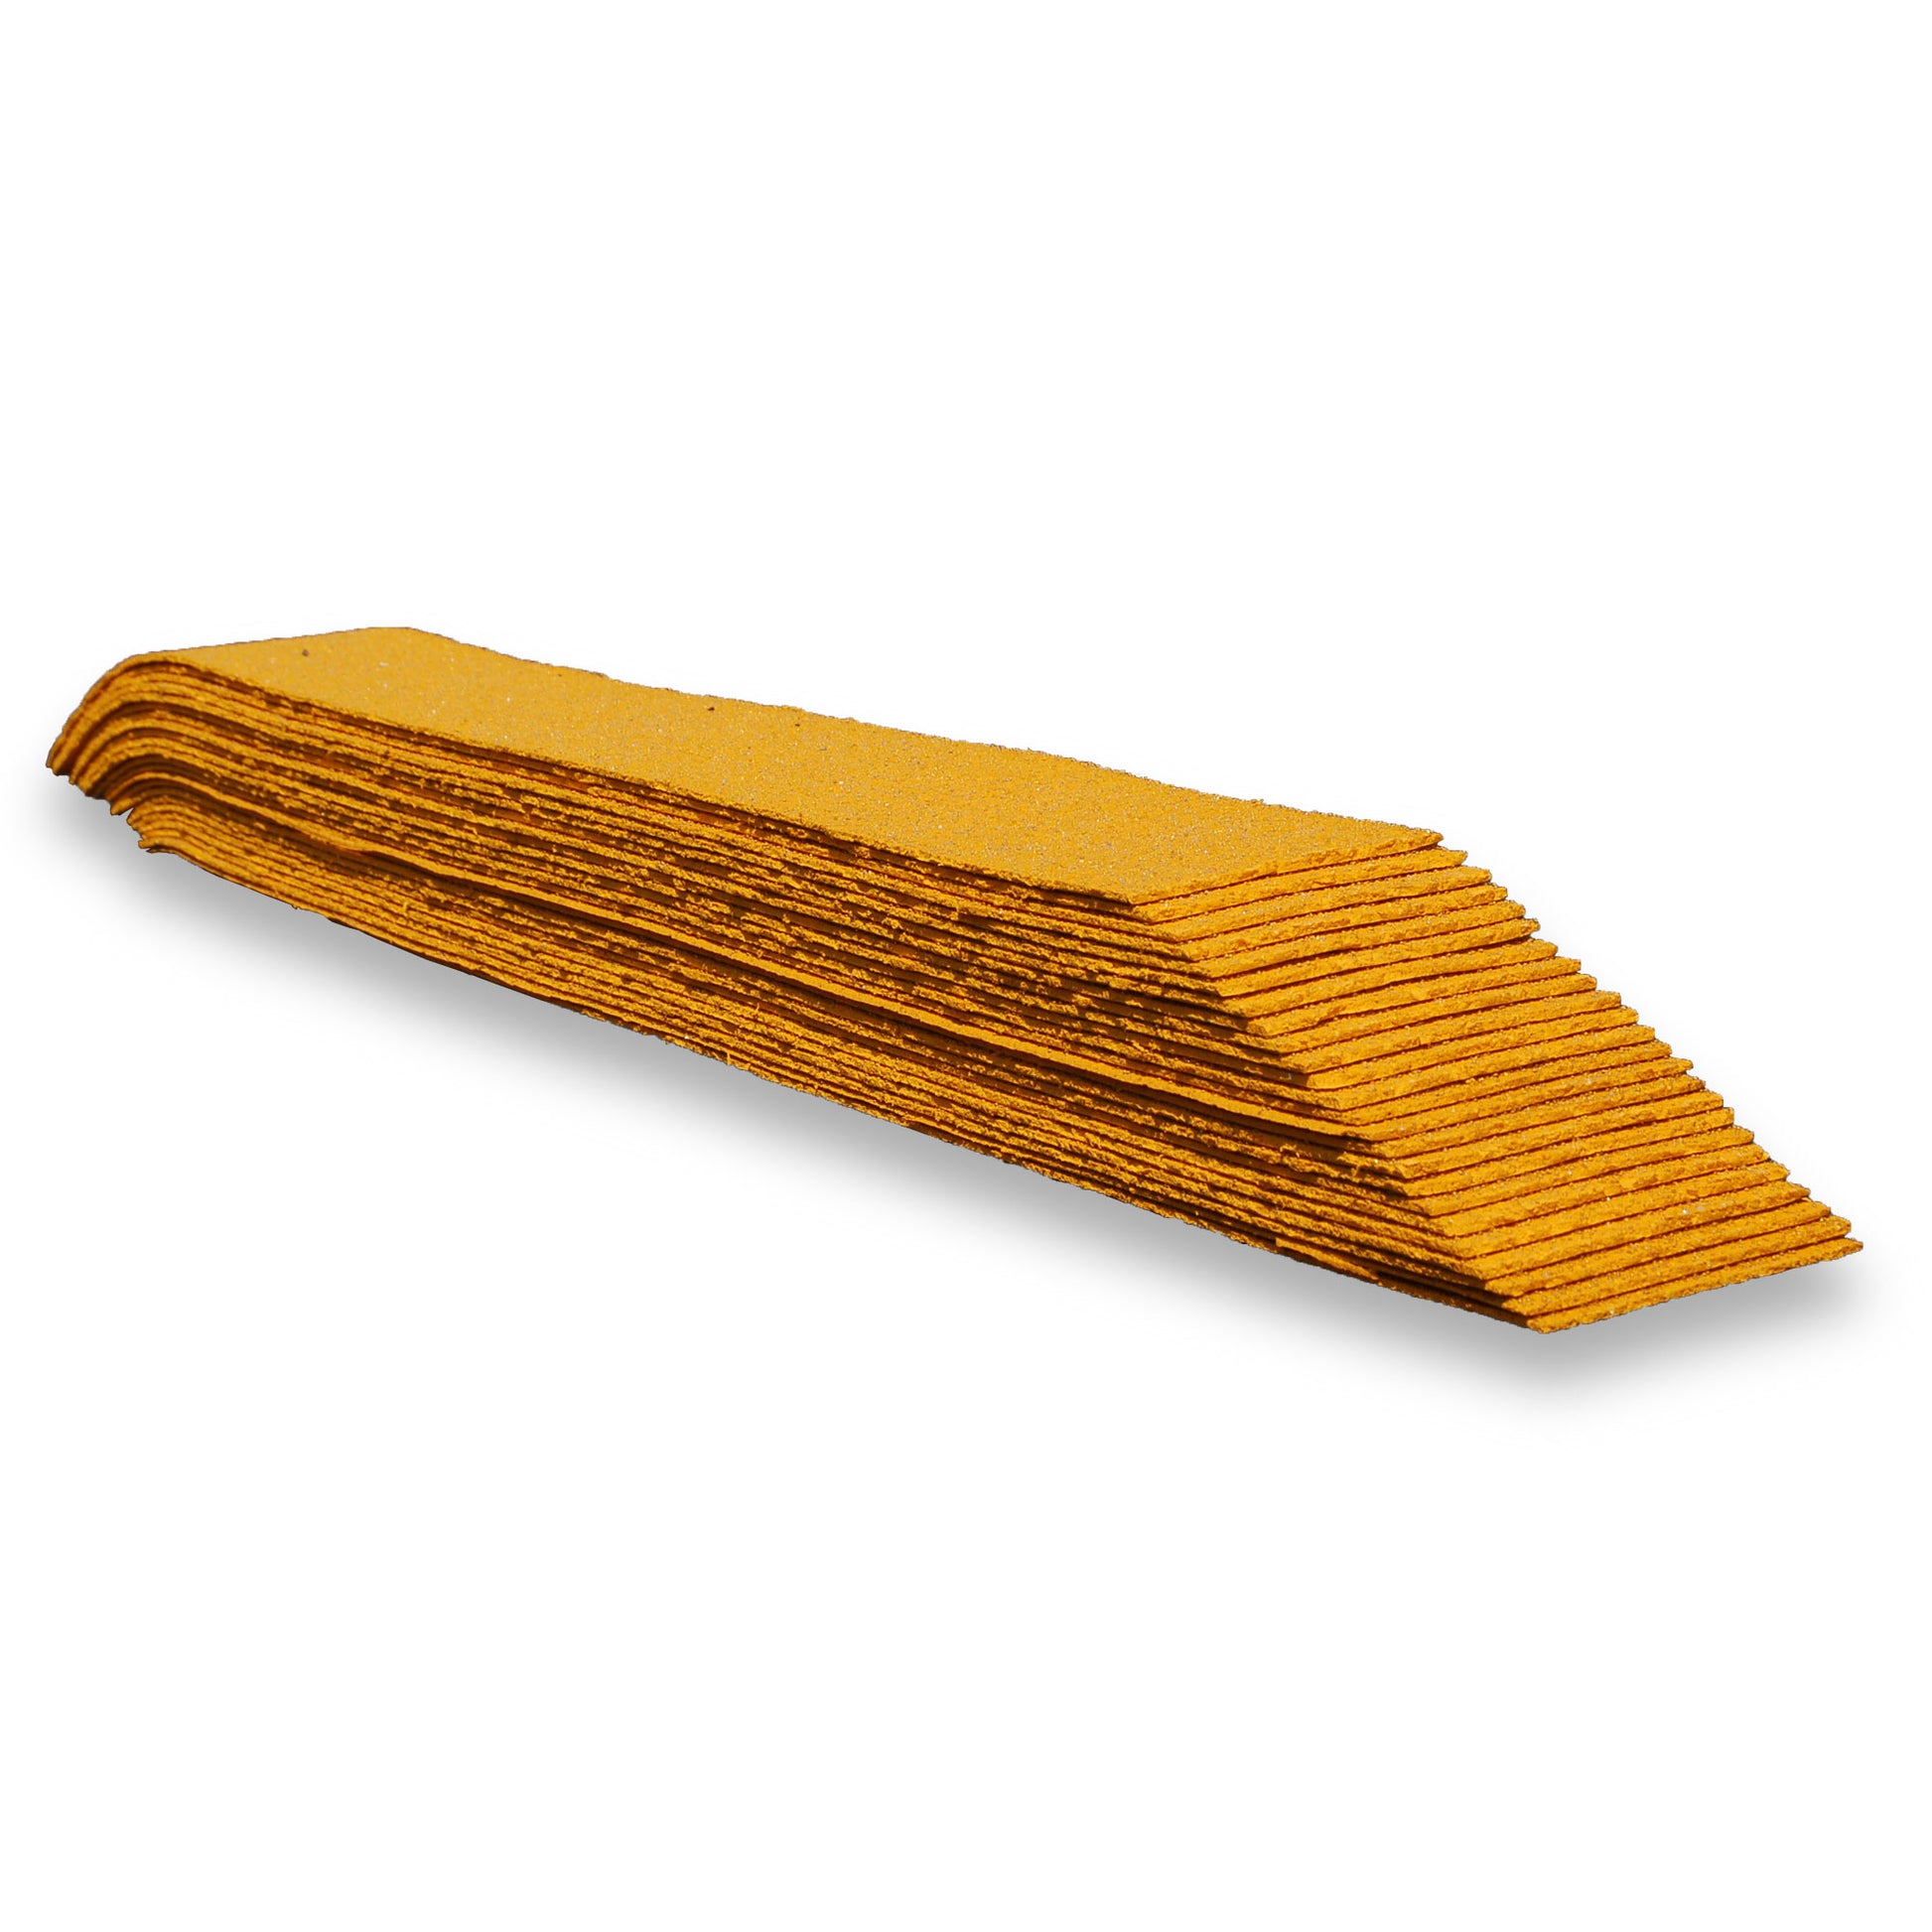 A stack of yellow preformed thermoplastic lines